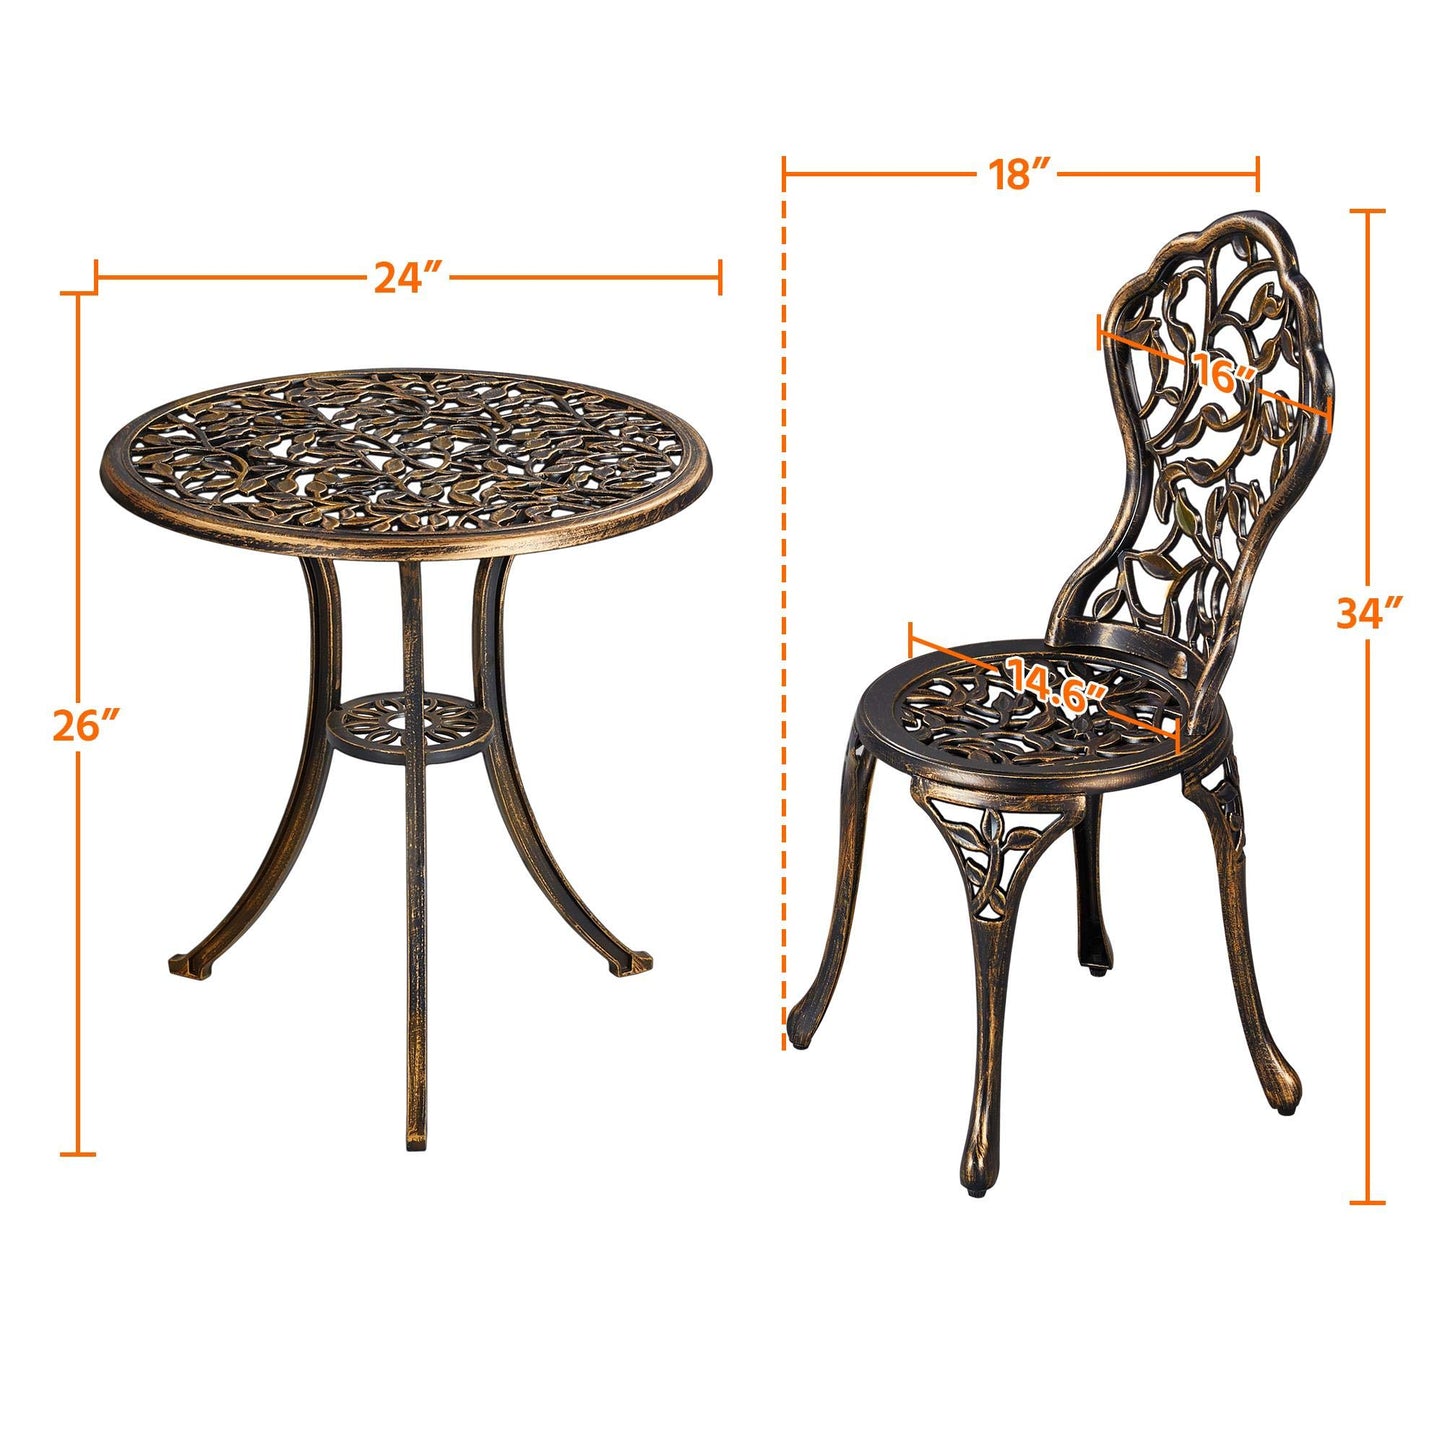 Yaheetech 3-Piece Outdoor Bistro Set w/Leaf Design, Rust-Resistant Cast Aluminum Table and Chairs for Balcony Backyard Garden